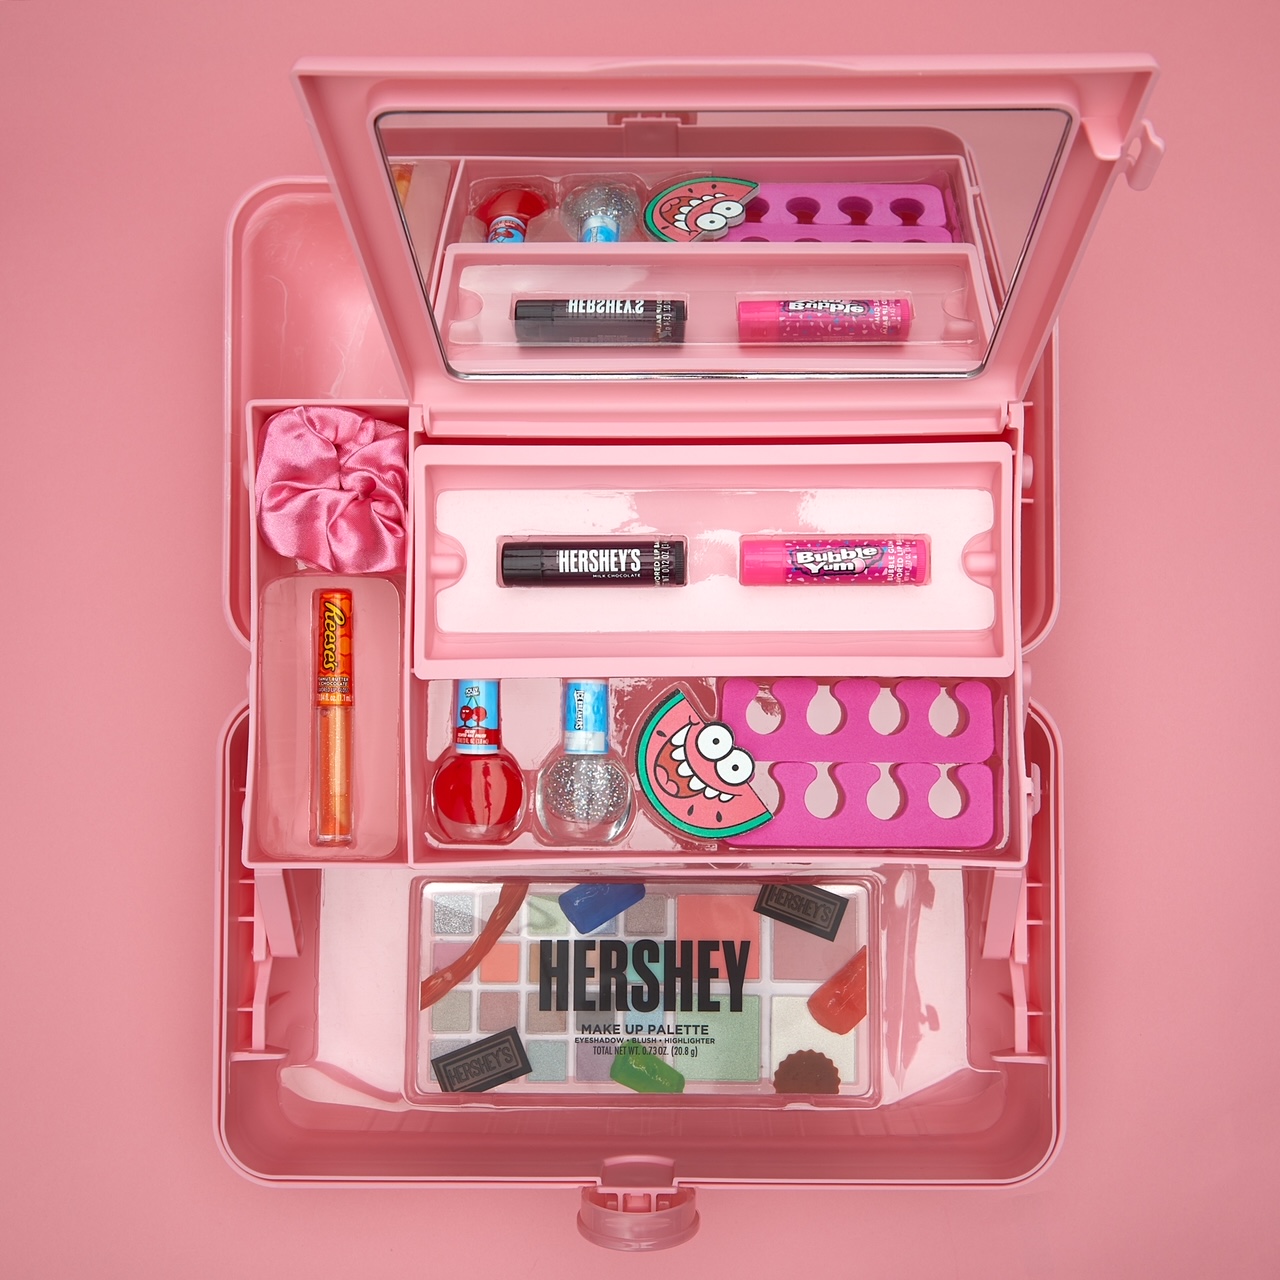 Taste Beauty and Hershey's Delectable New Beauty Organizers From ...